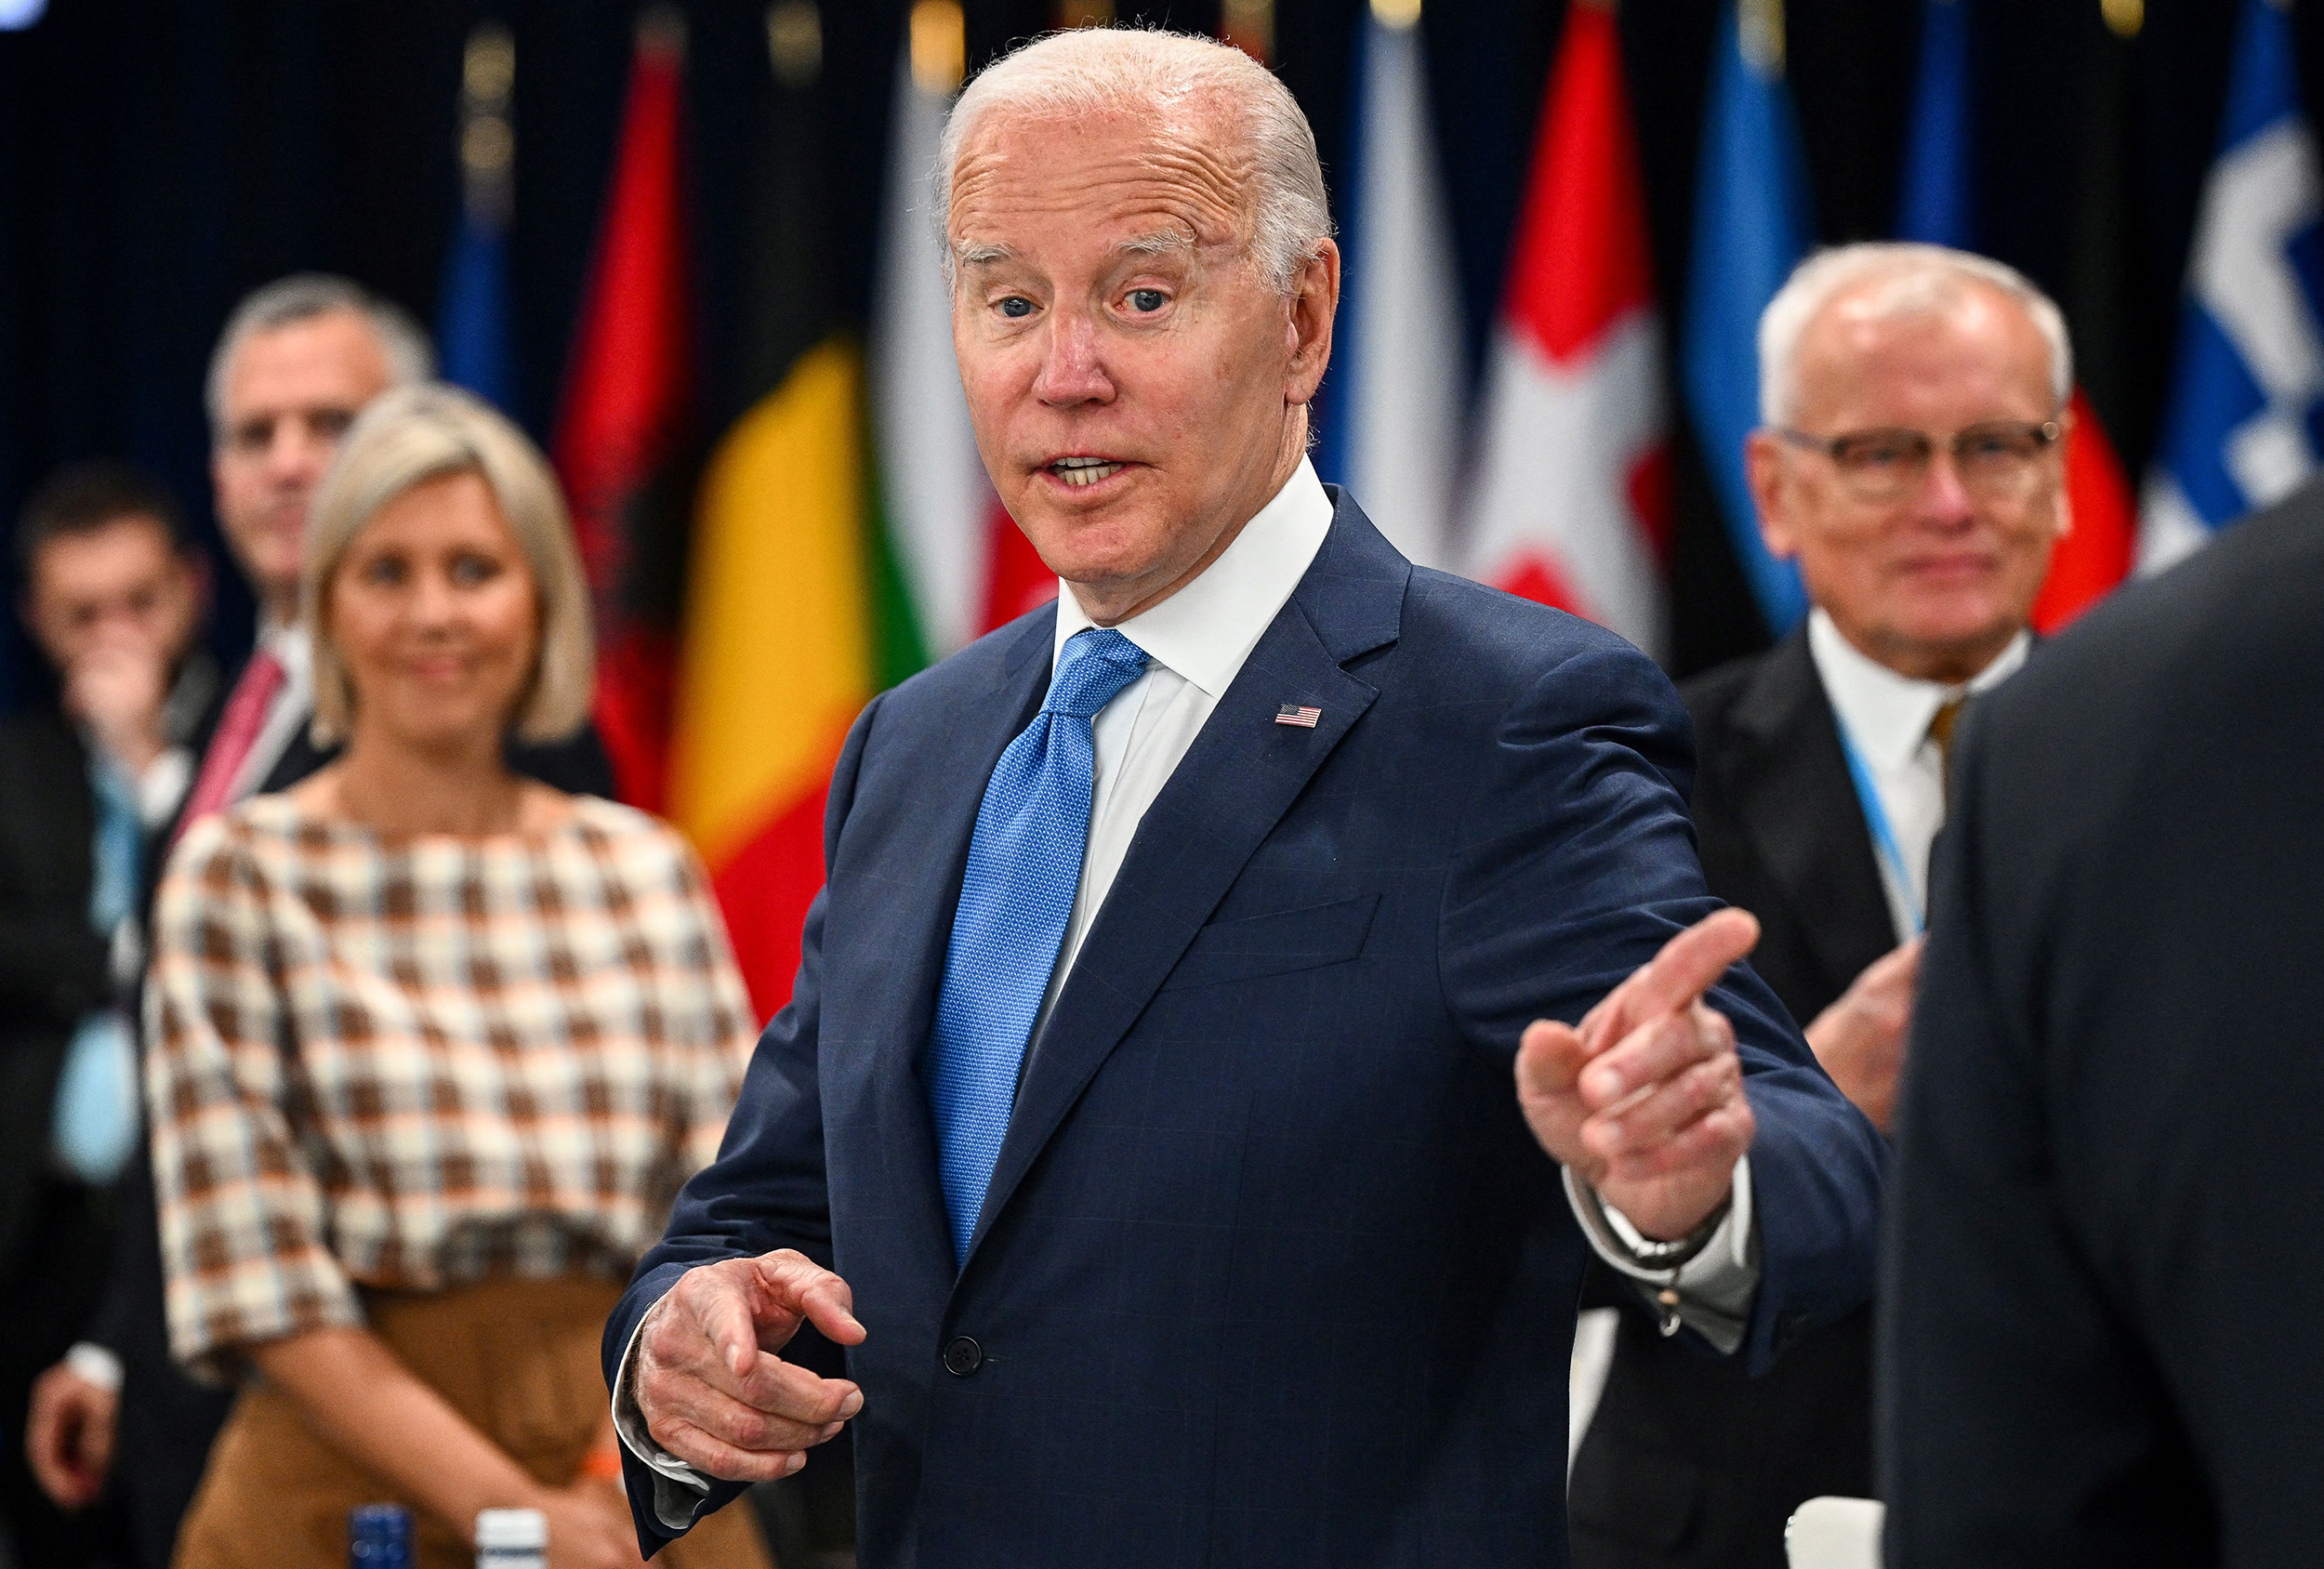 US President Joe Biden gestures at the start of the first plenary session of the NATO summit at the Ifema congress centre in Madrid, Spain, on June 29.